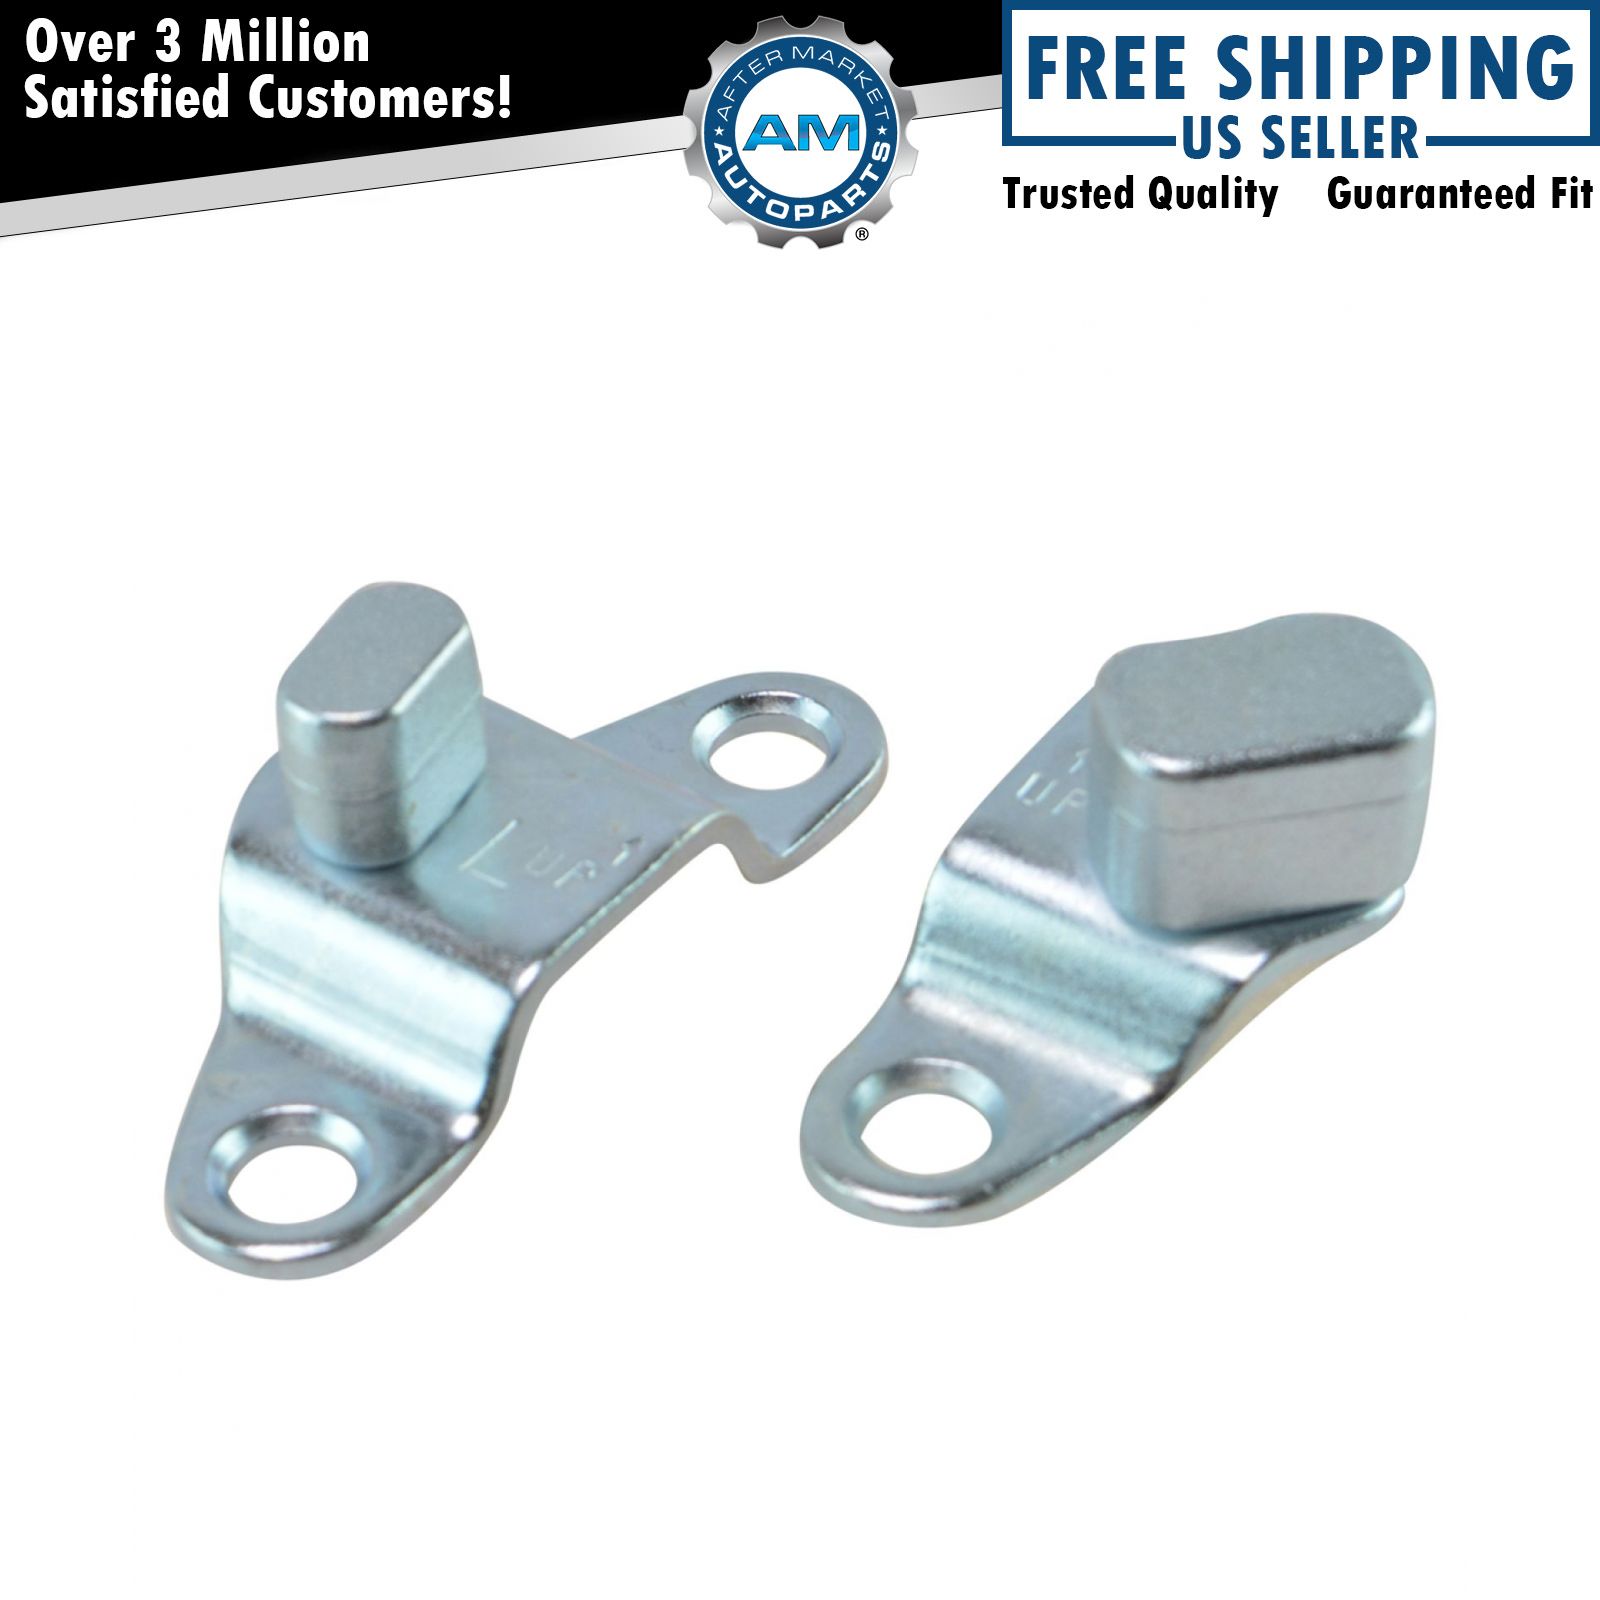 Dorman Body Mounted Tailgate Hinge Pair 2pc for Chevy Pickup Truck New